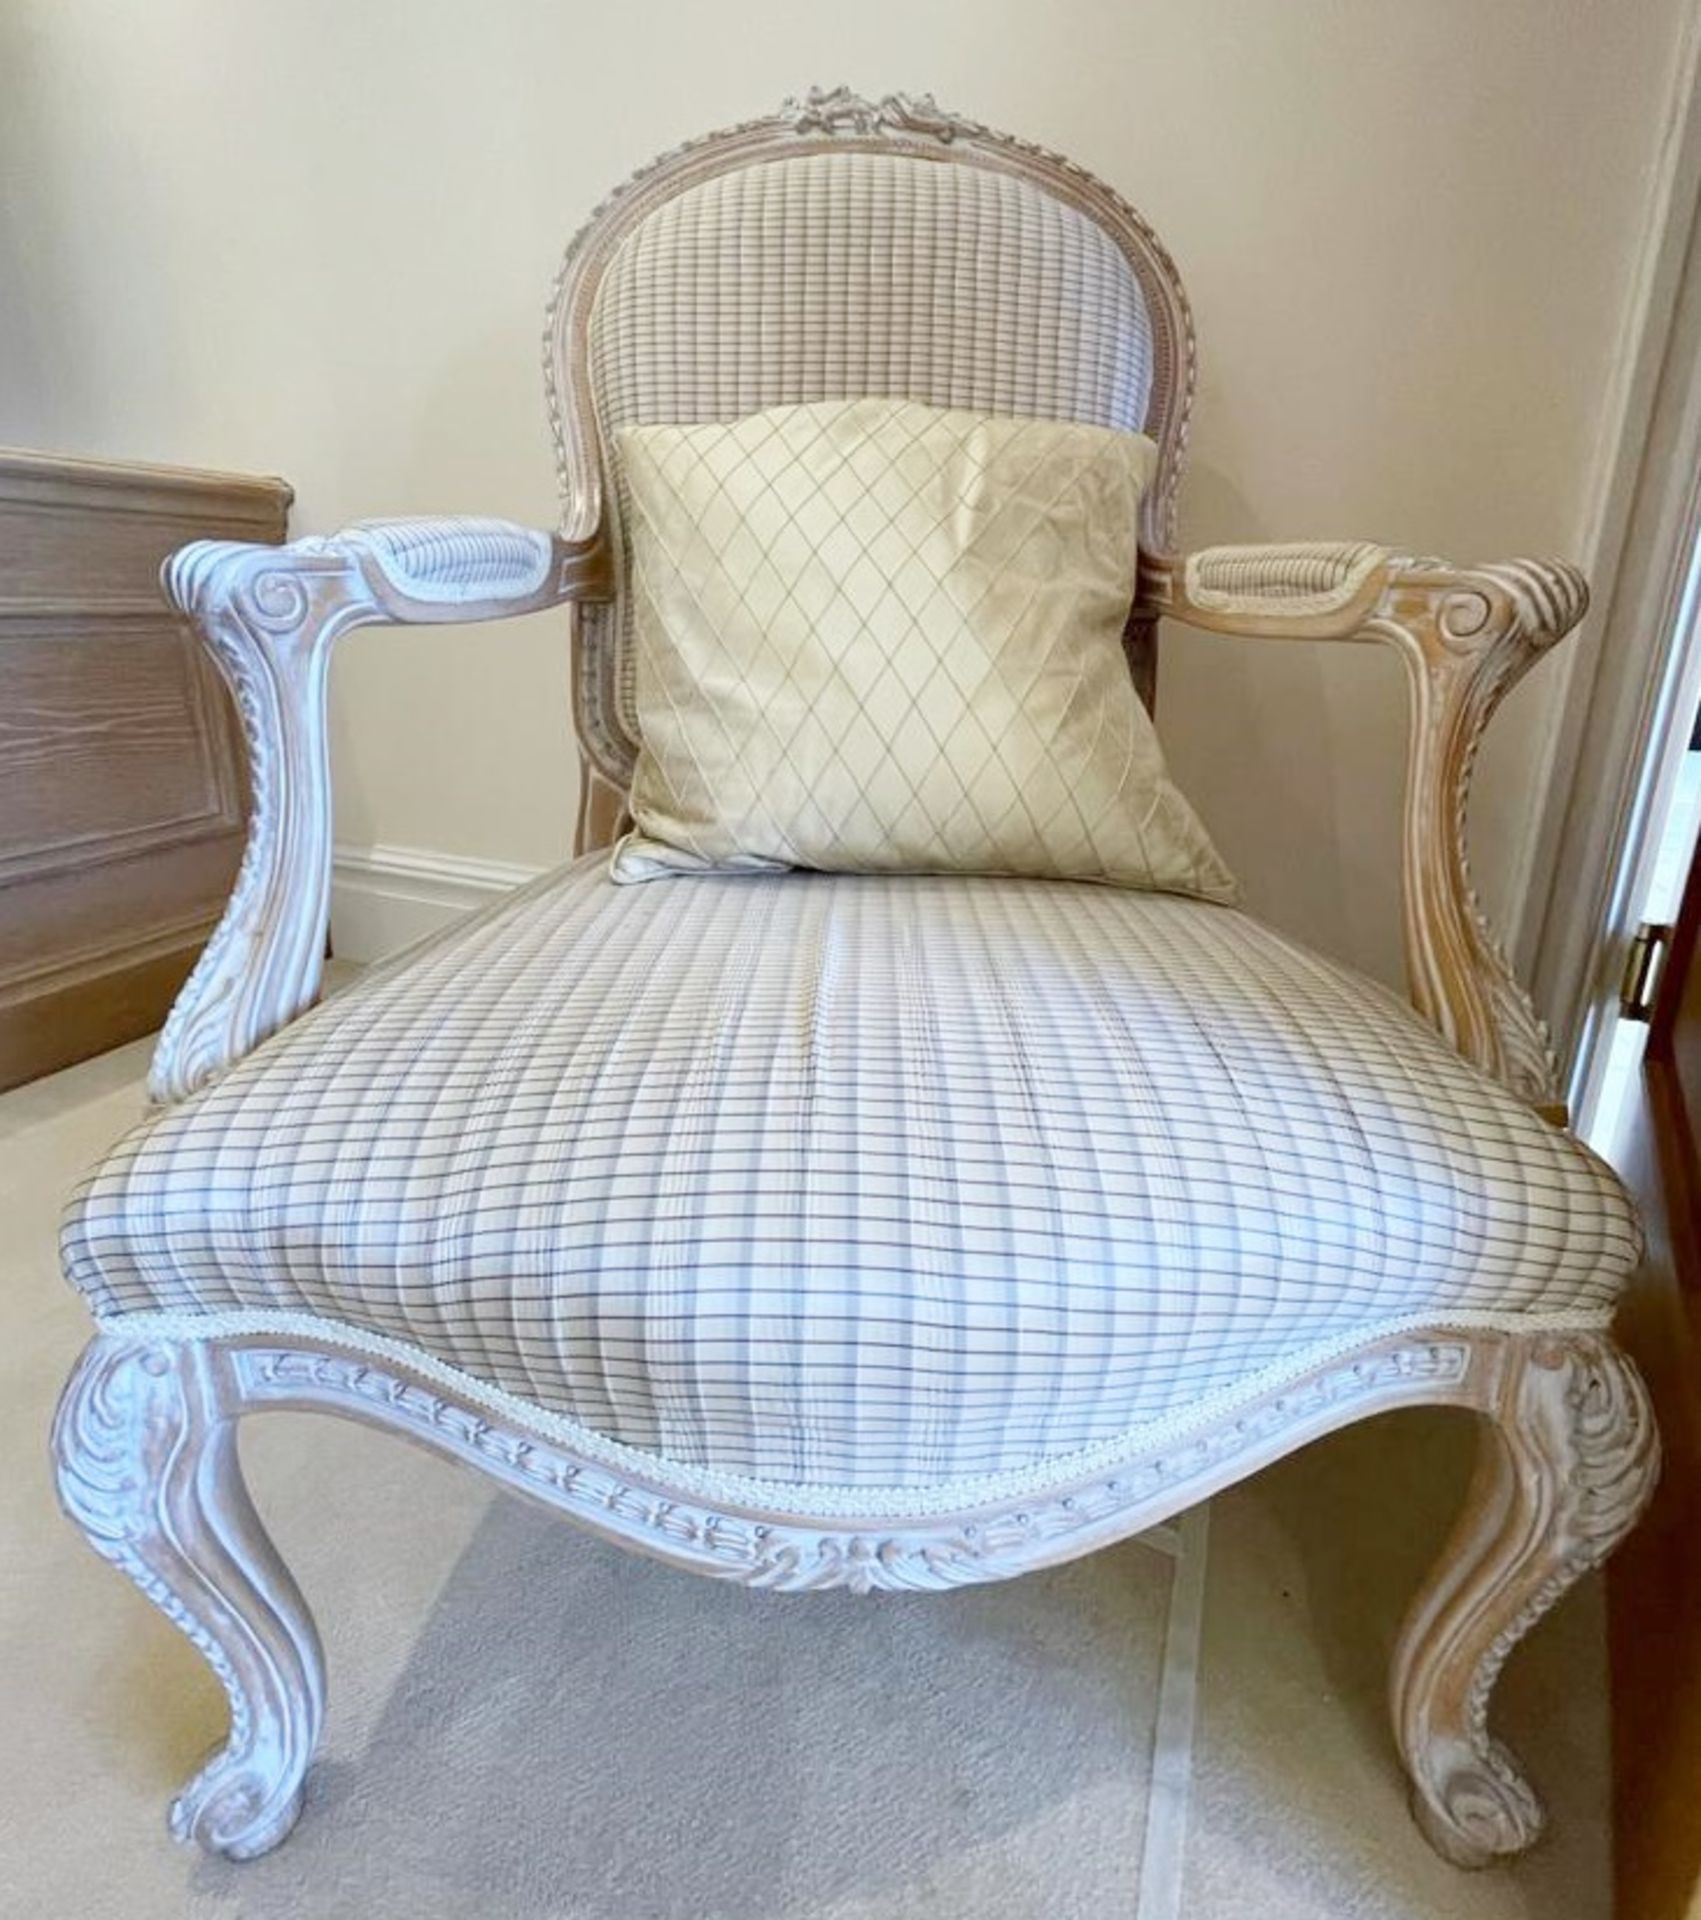 Pair of French Shabby Chic Bedroom Chairs - Stunning Carved Wood Chair Upholstered With Striped - Image 8 of 16